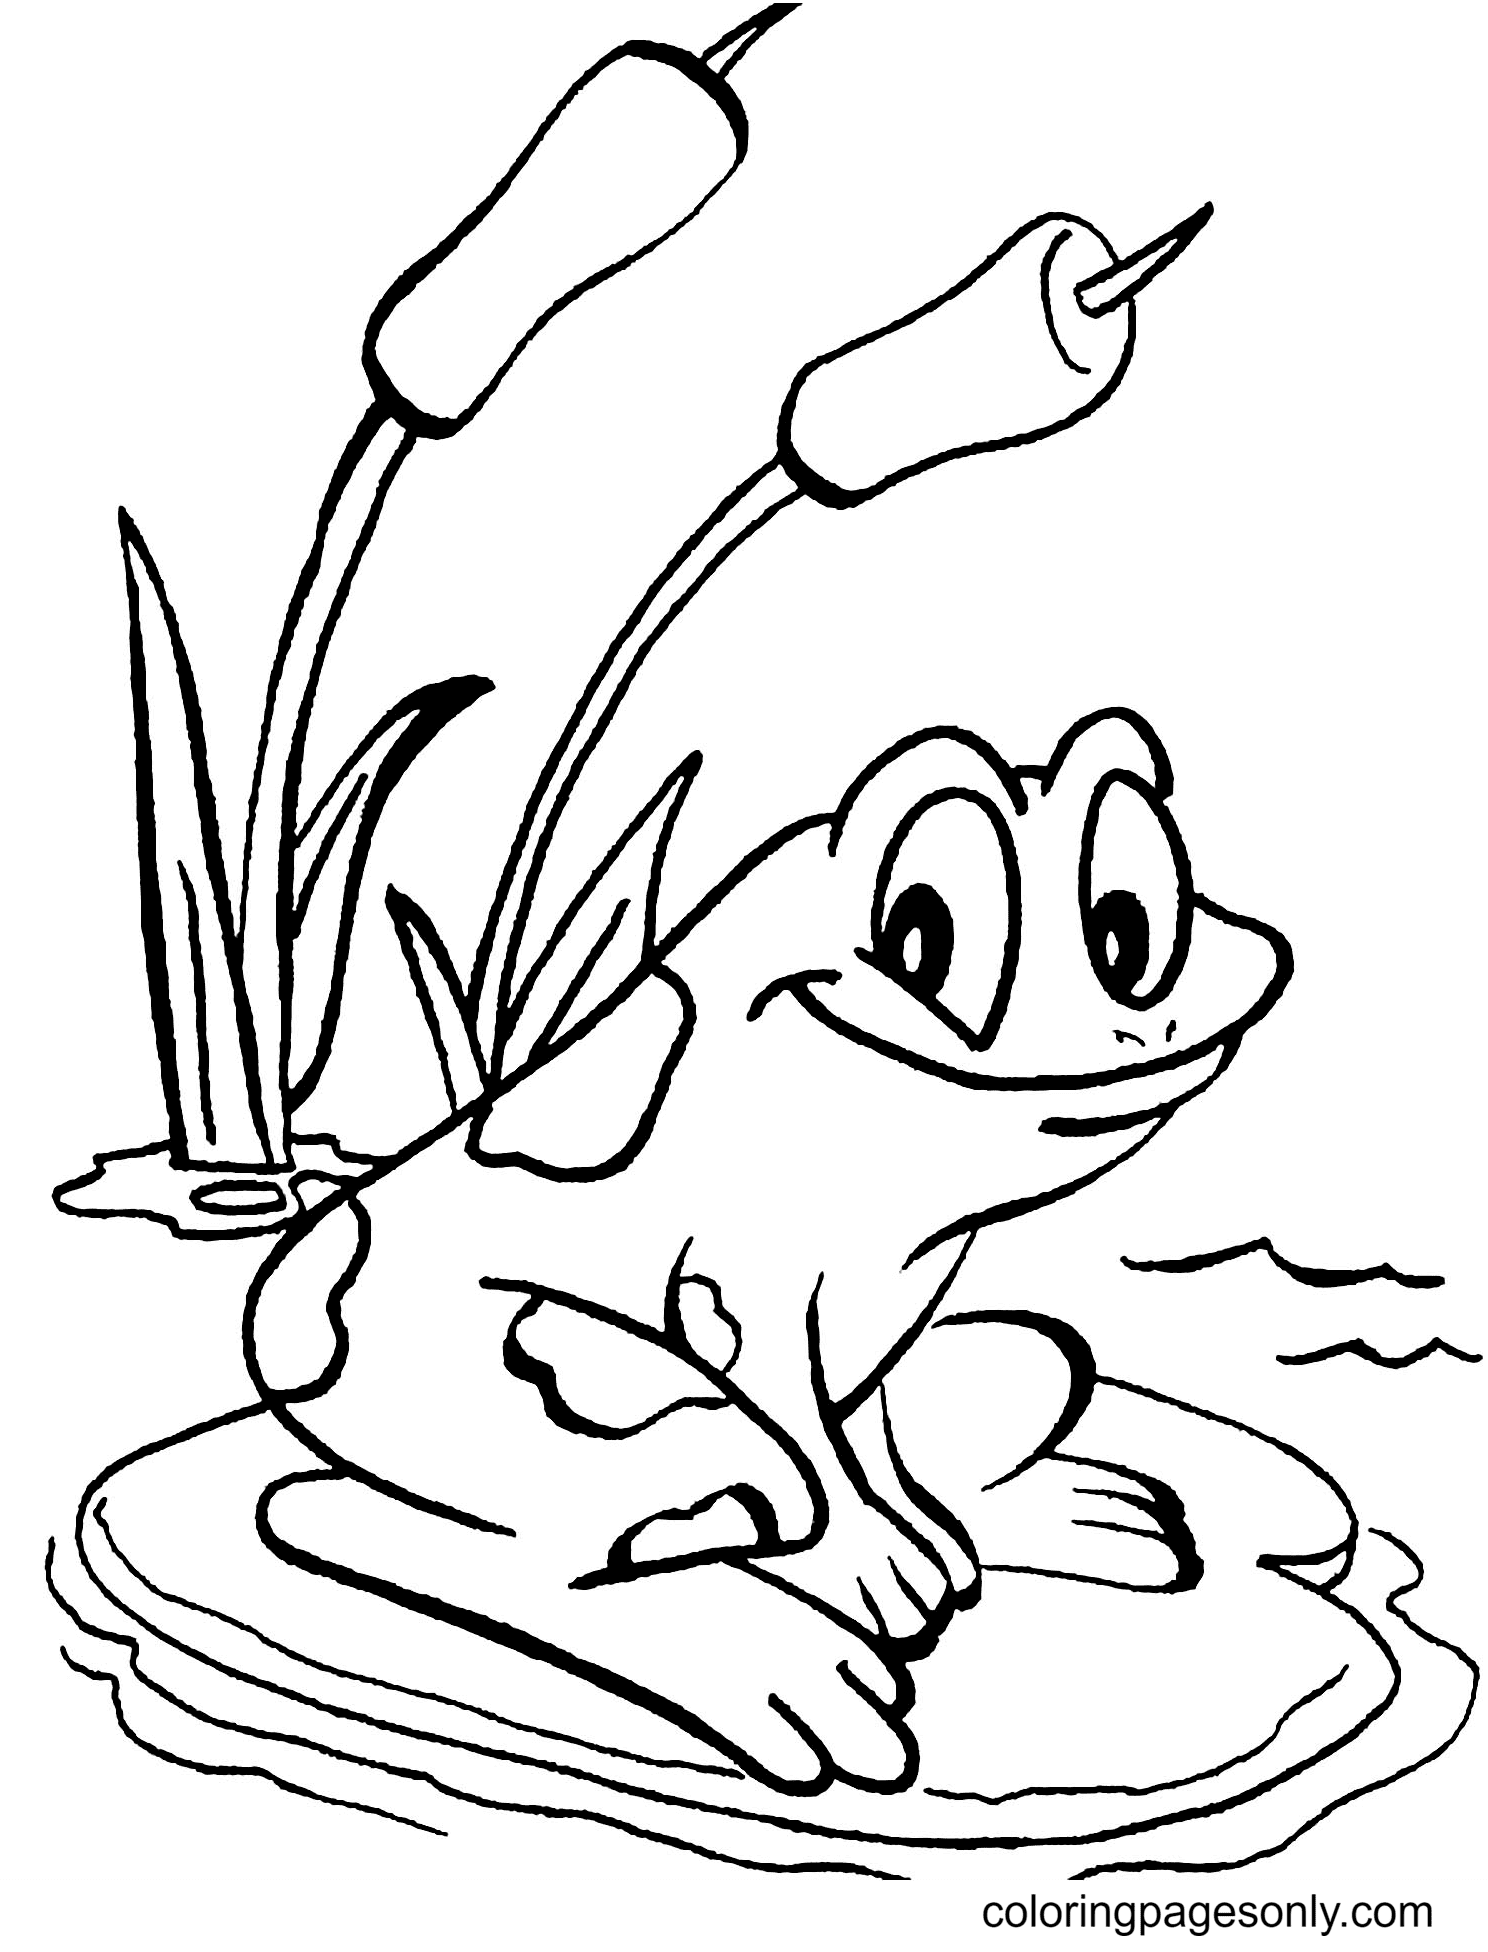 Frog to Download For Free Coloring Page